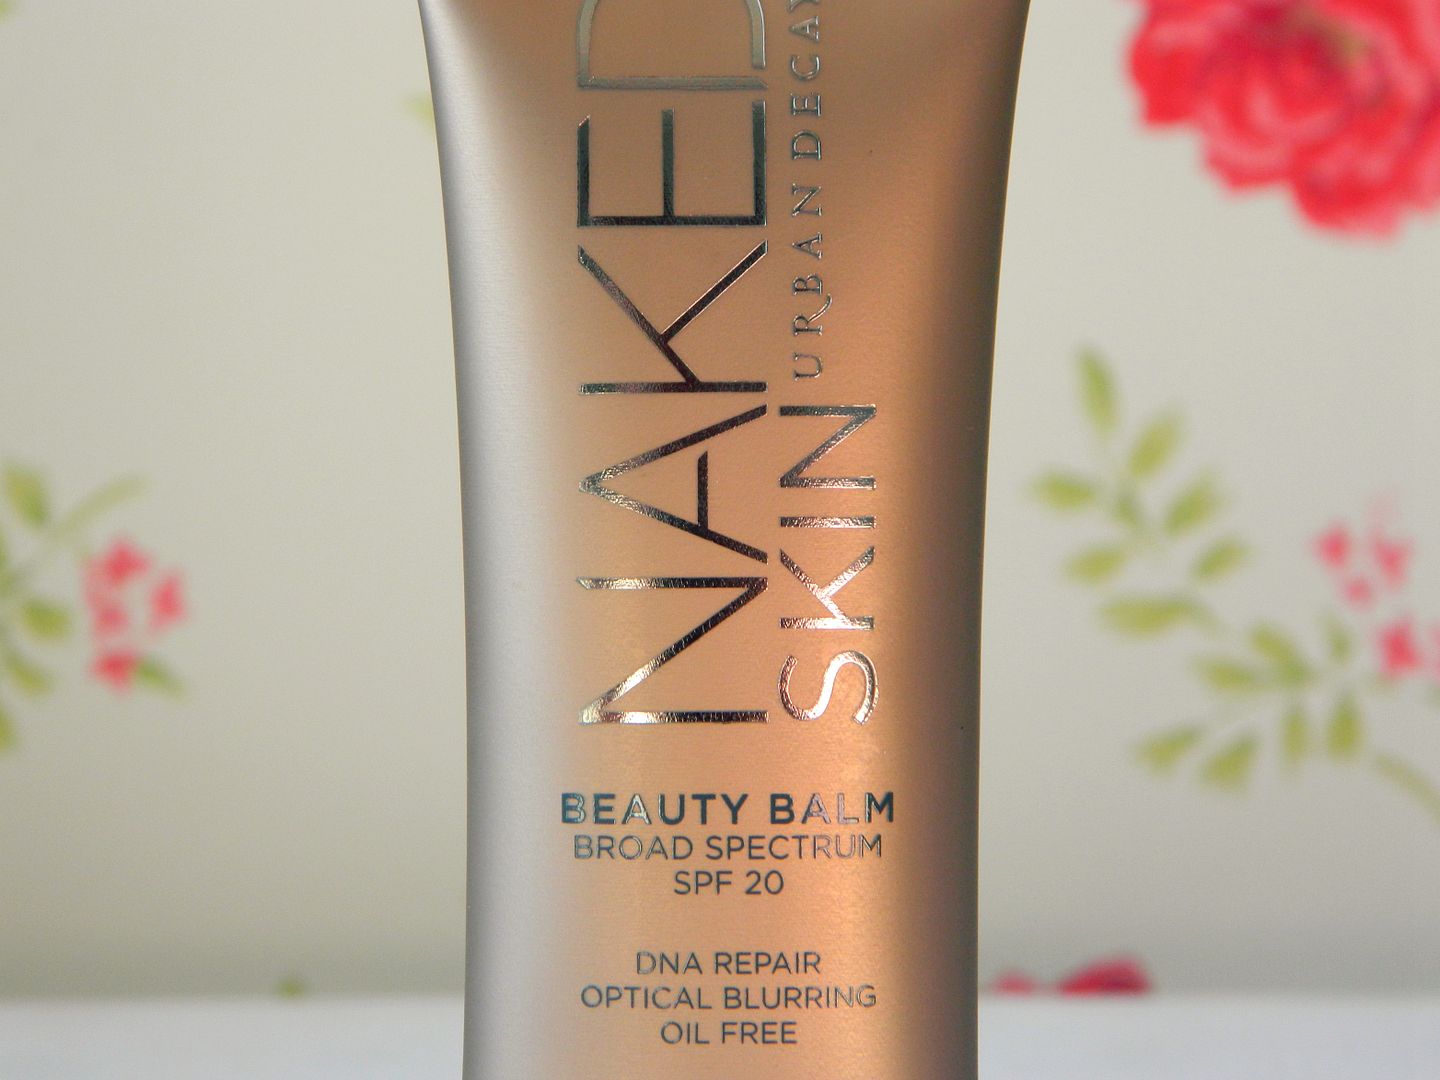 Urban Decay Naked Skin Beauty Balm Close Up Packaging Review Belle-amie